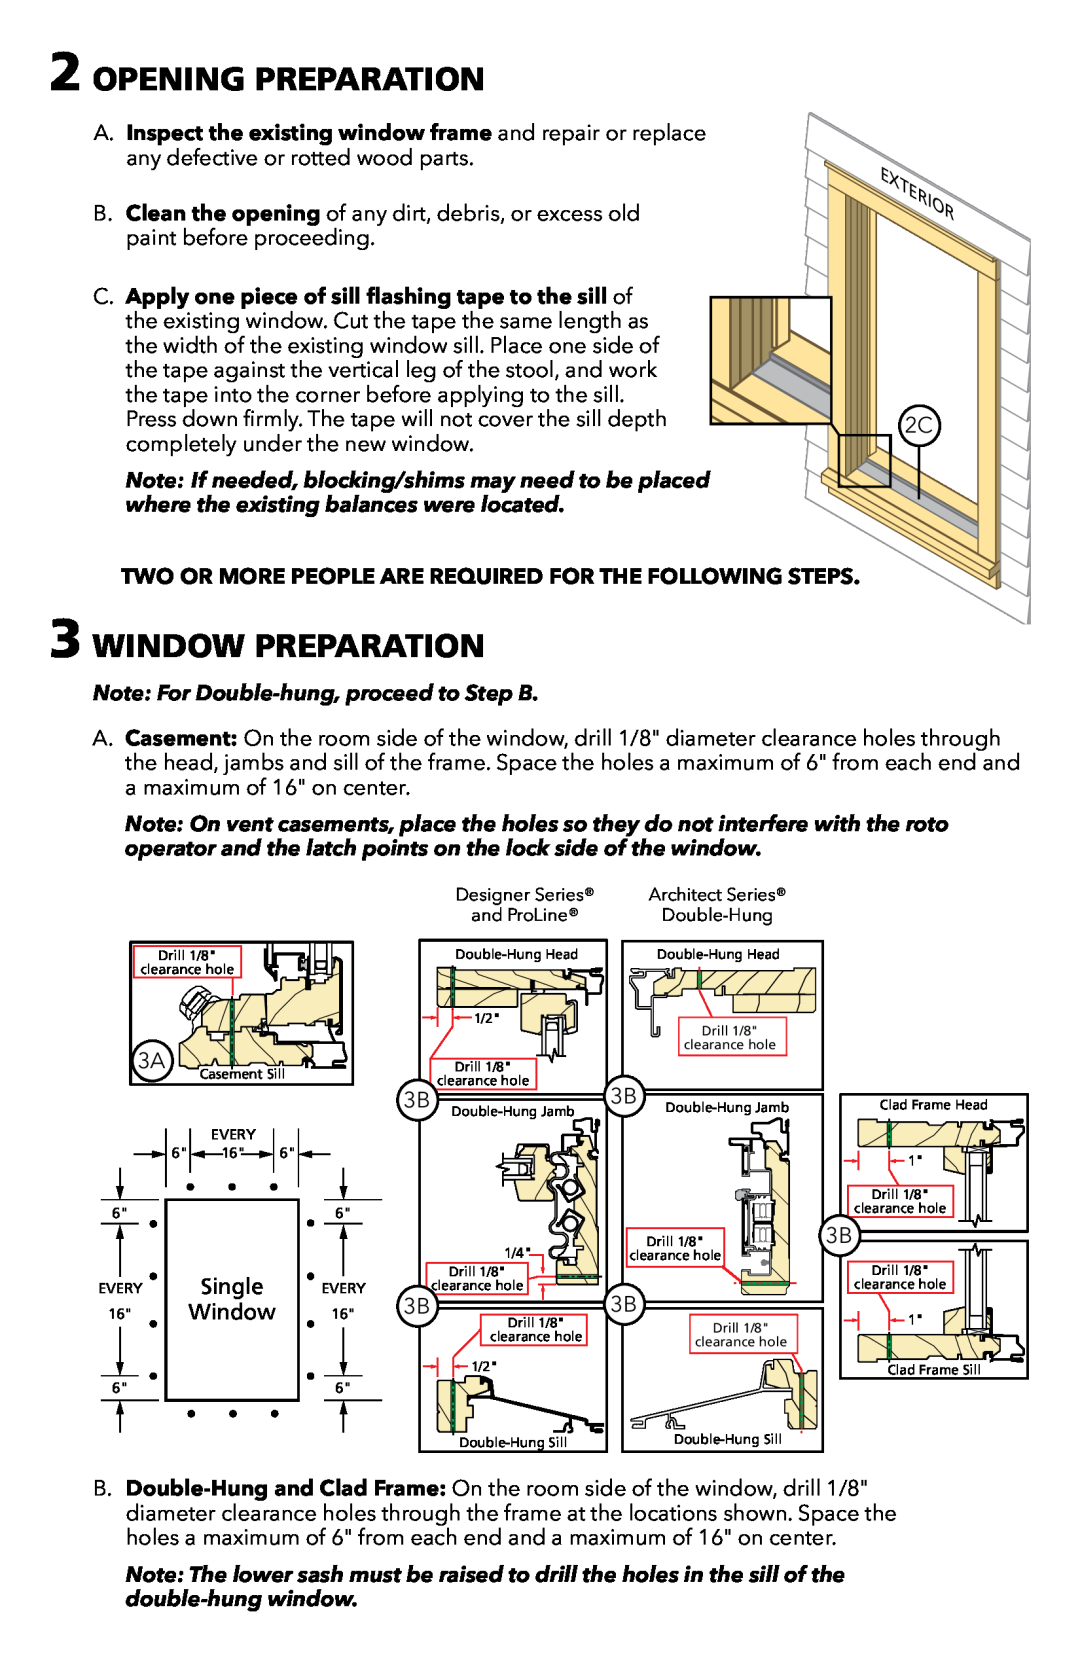 Pella 80WX0101 warranty Opening Preparation, Window Preparation, Note For Double-hung, proceed to Step B 